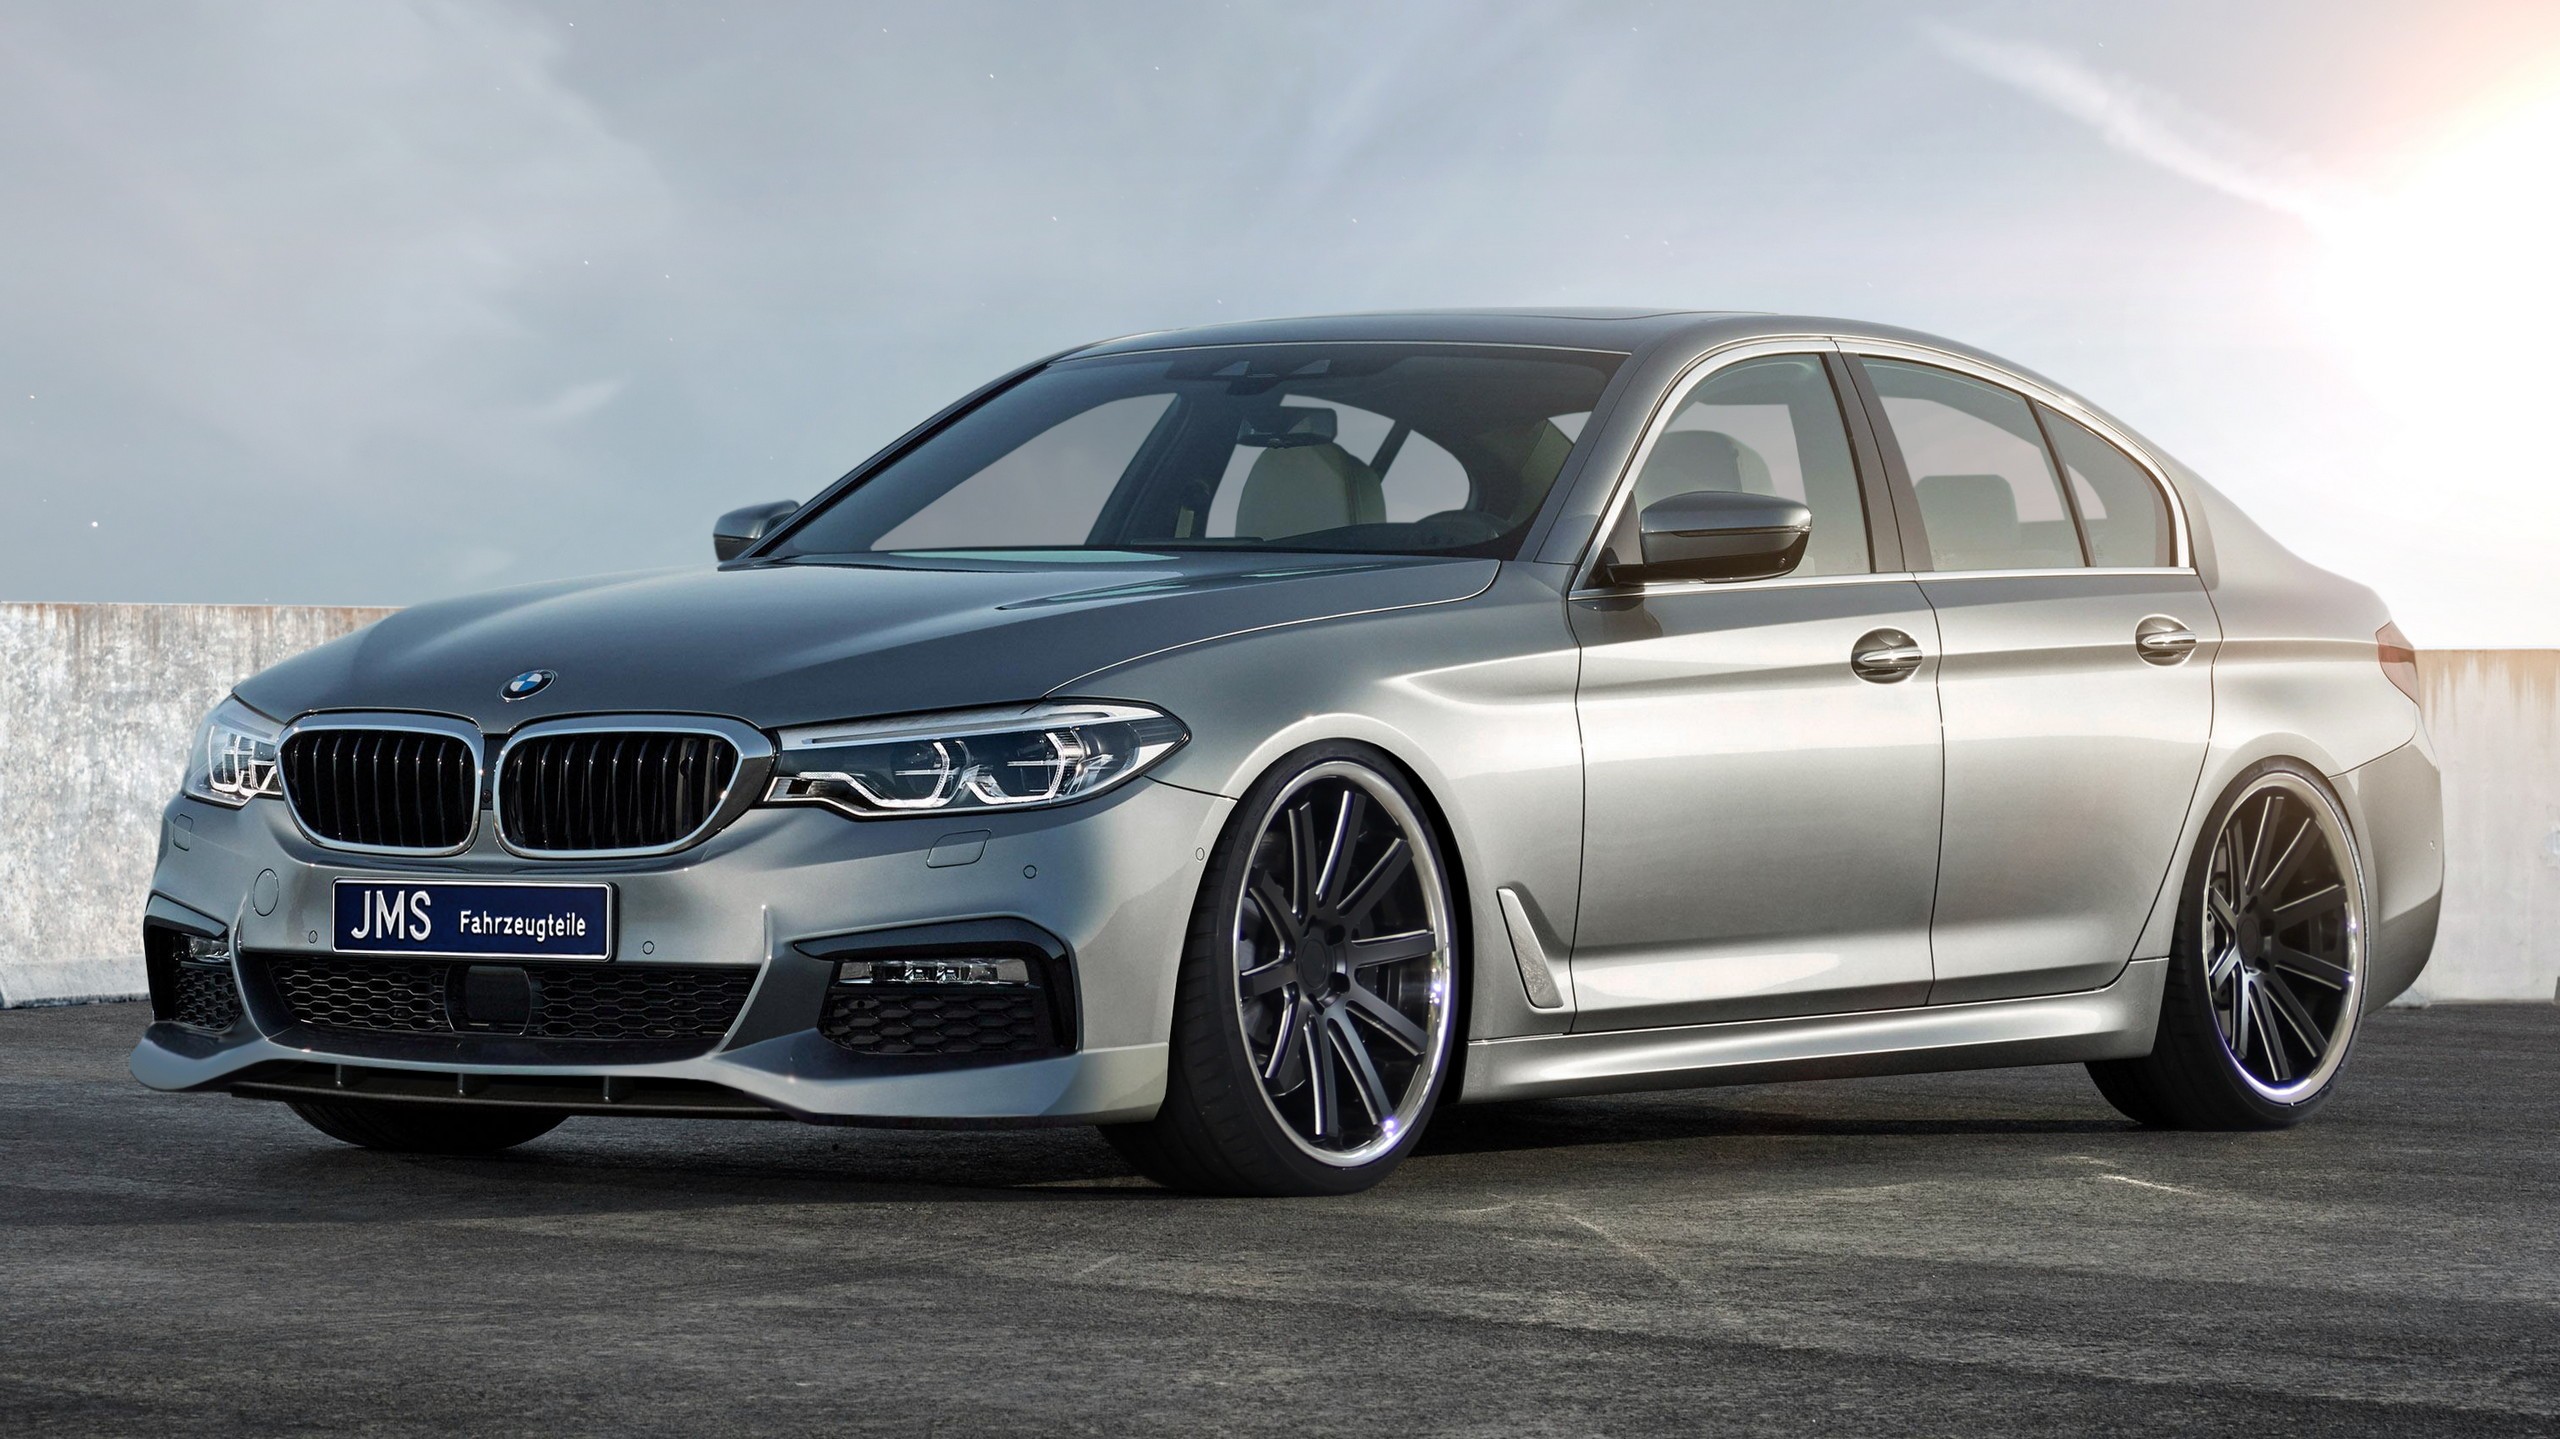 Tuner Wants to Make Your G30/G31 BMW 5 Series Sportier With New Add-Ons,  What Say You? - autoevolution